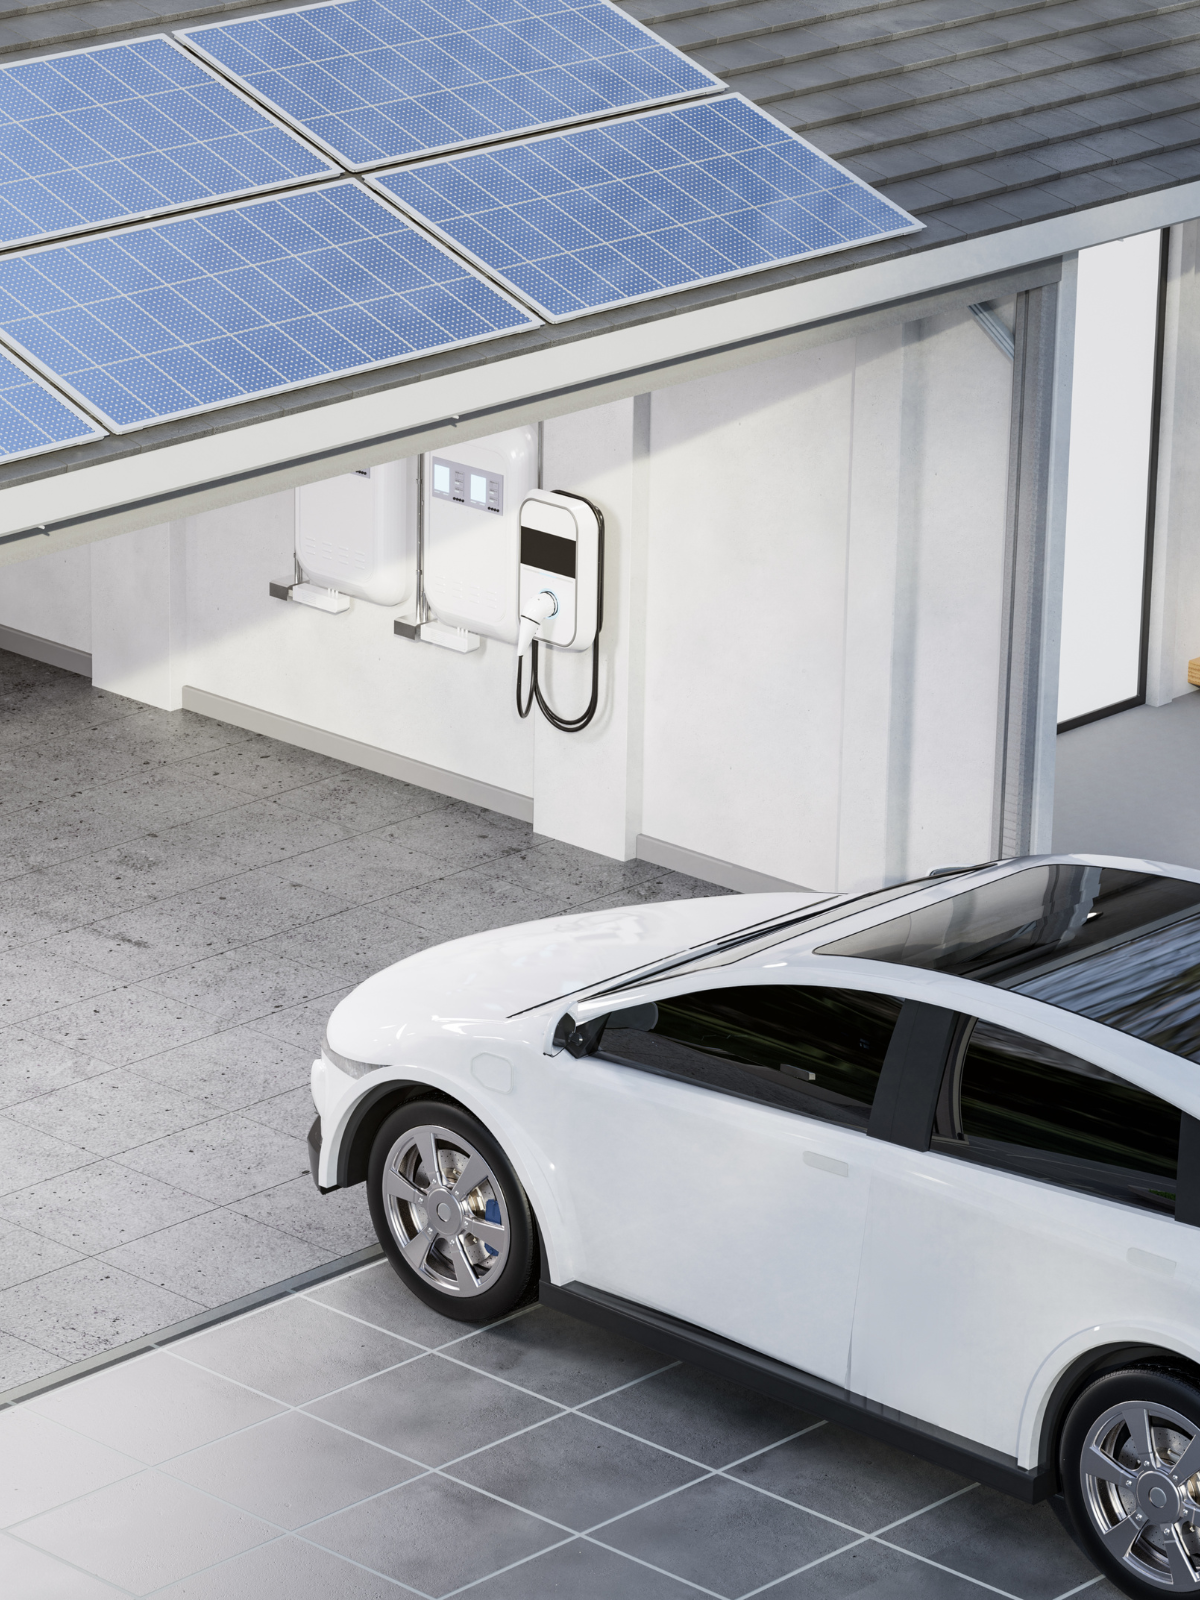 lithium home energy storage system is an ideal choice for homeowners seeking an efficient and space-saving solution to harness and store solar energy.